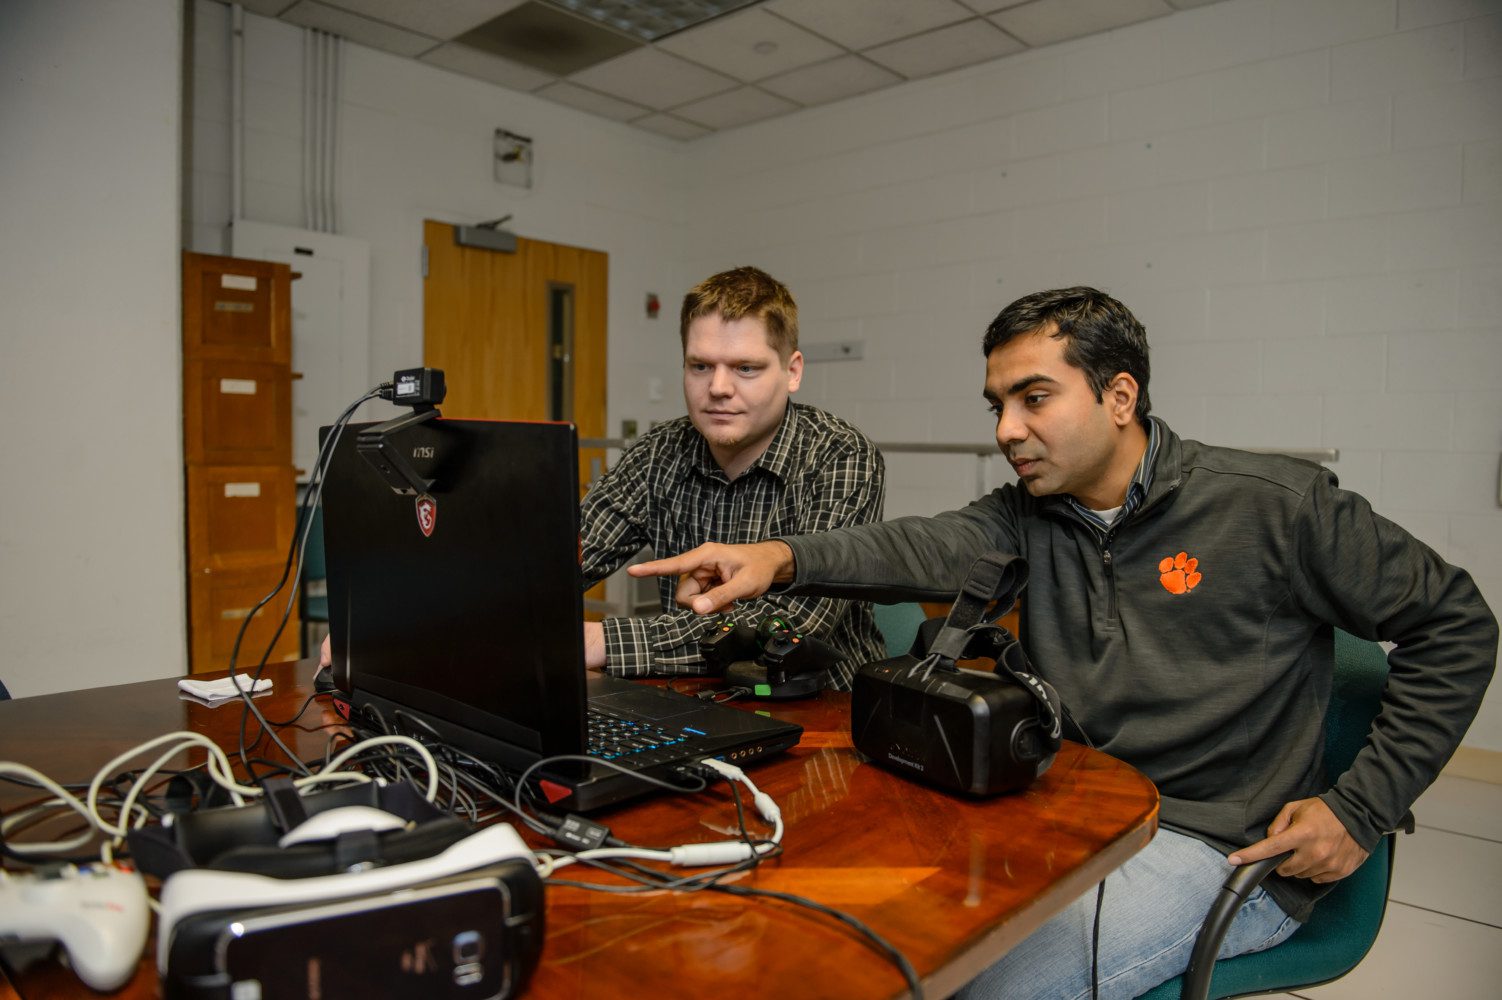 Kapil Chalil Madathil (left) works with Jeff Bertrand in their Clemson University lab, where they create virtual reality simulations to support workforce development.